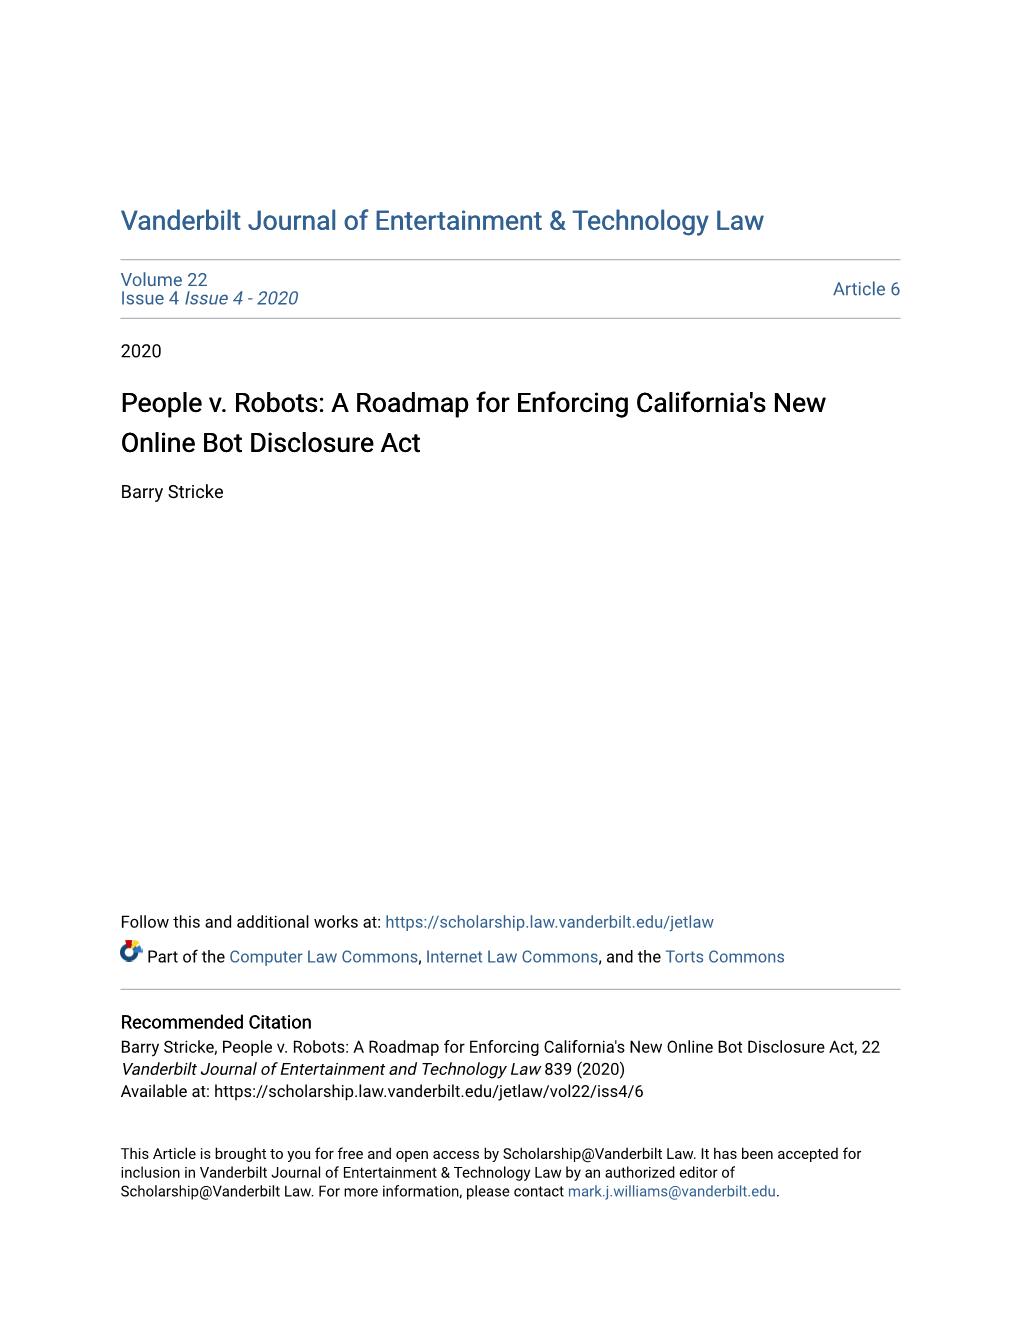 People V. Robots: a Roadmap for Enforcing California's New Online Bot Disclosure Act